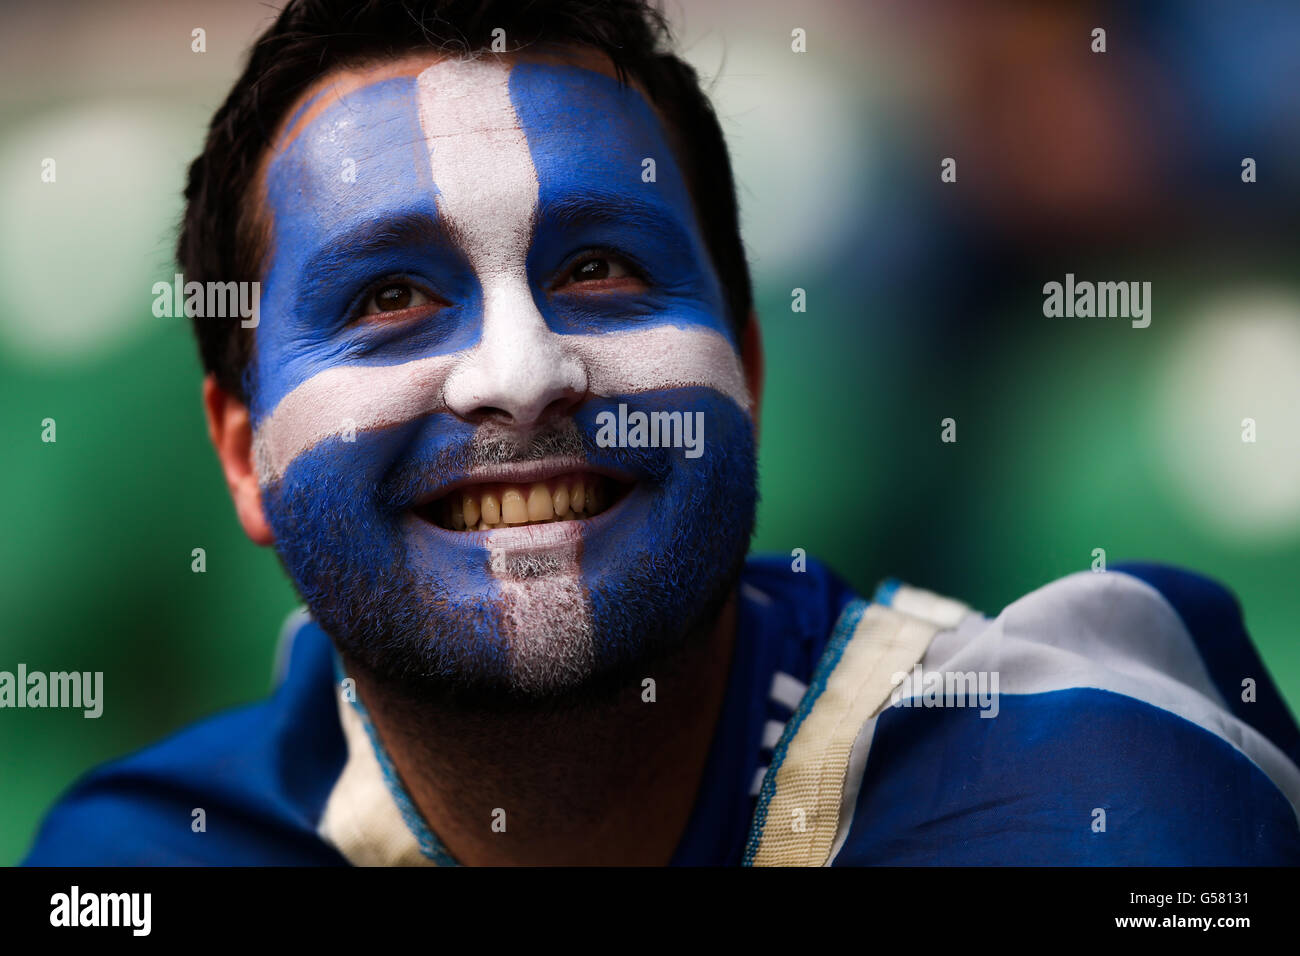 Soccer - UEFA Euro 2012 - Group A - Greece v Czech Republic - Municipal Stadium. A Greek fan shows support for his team in the stands Stock Photo